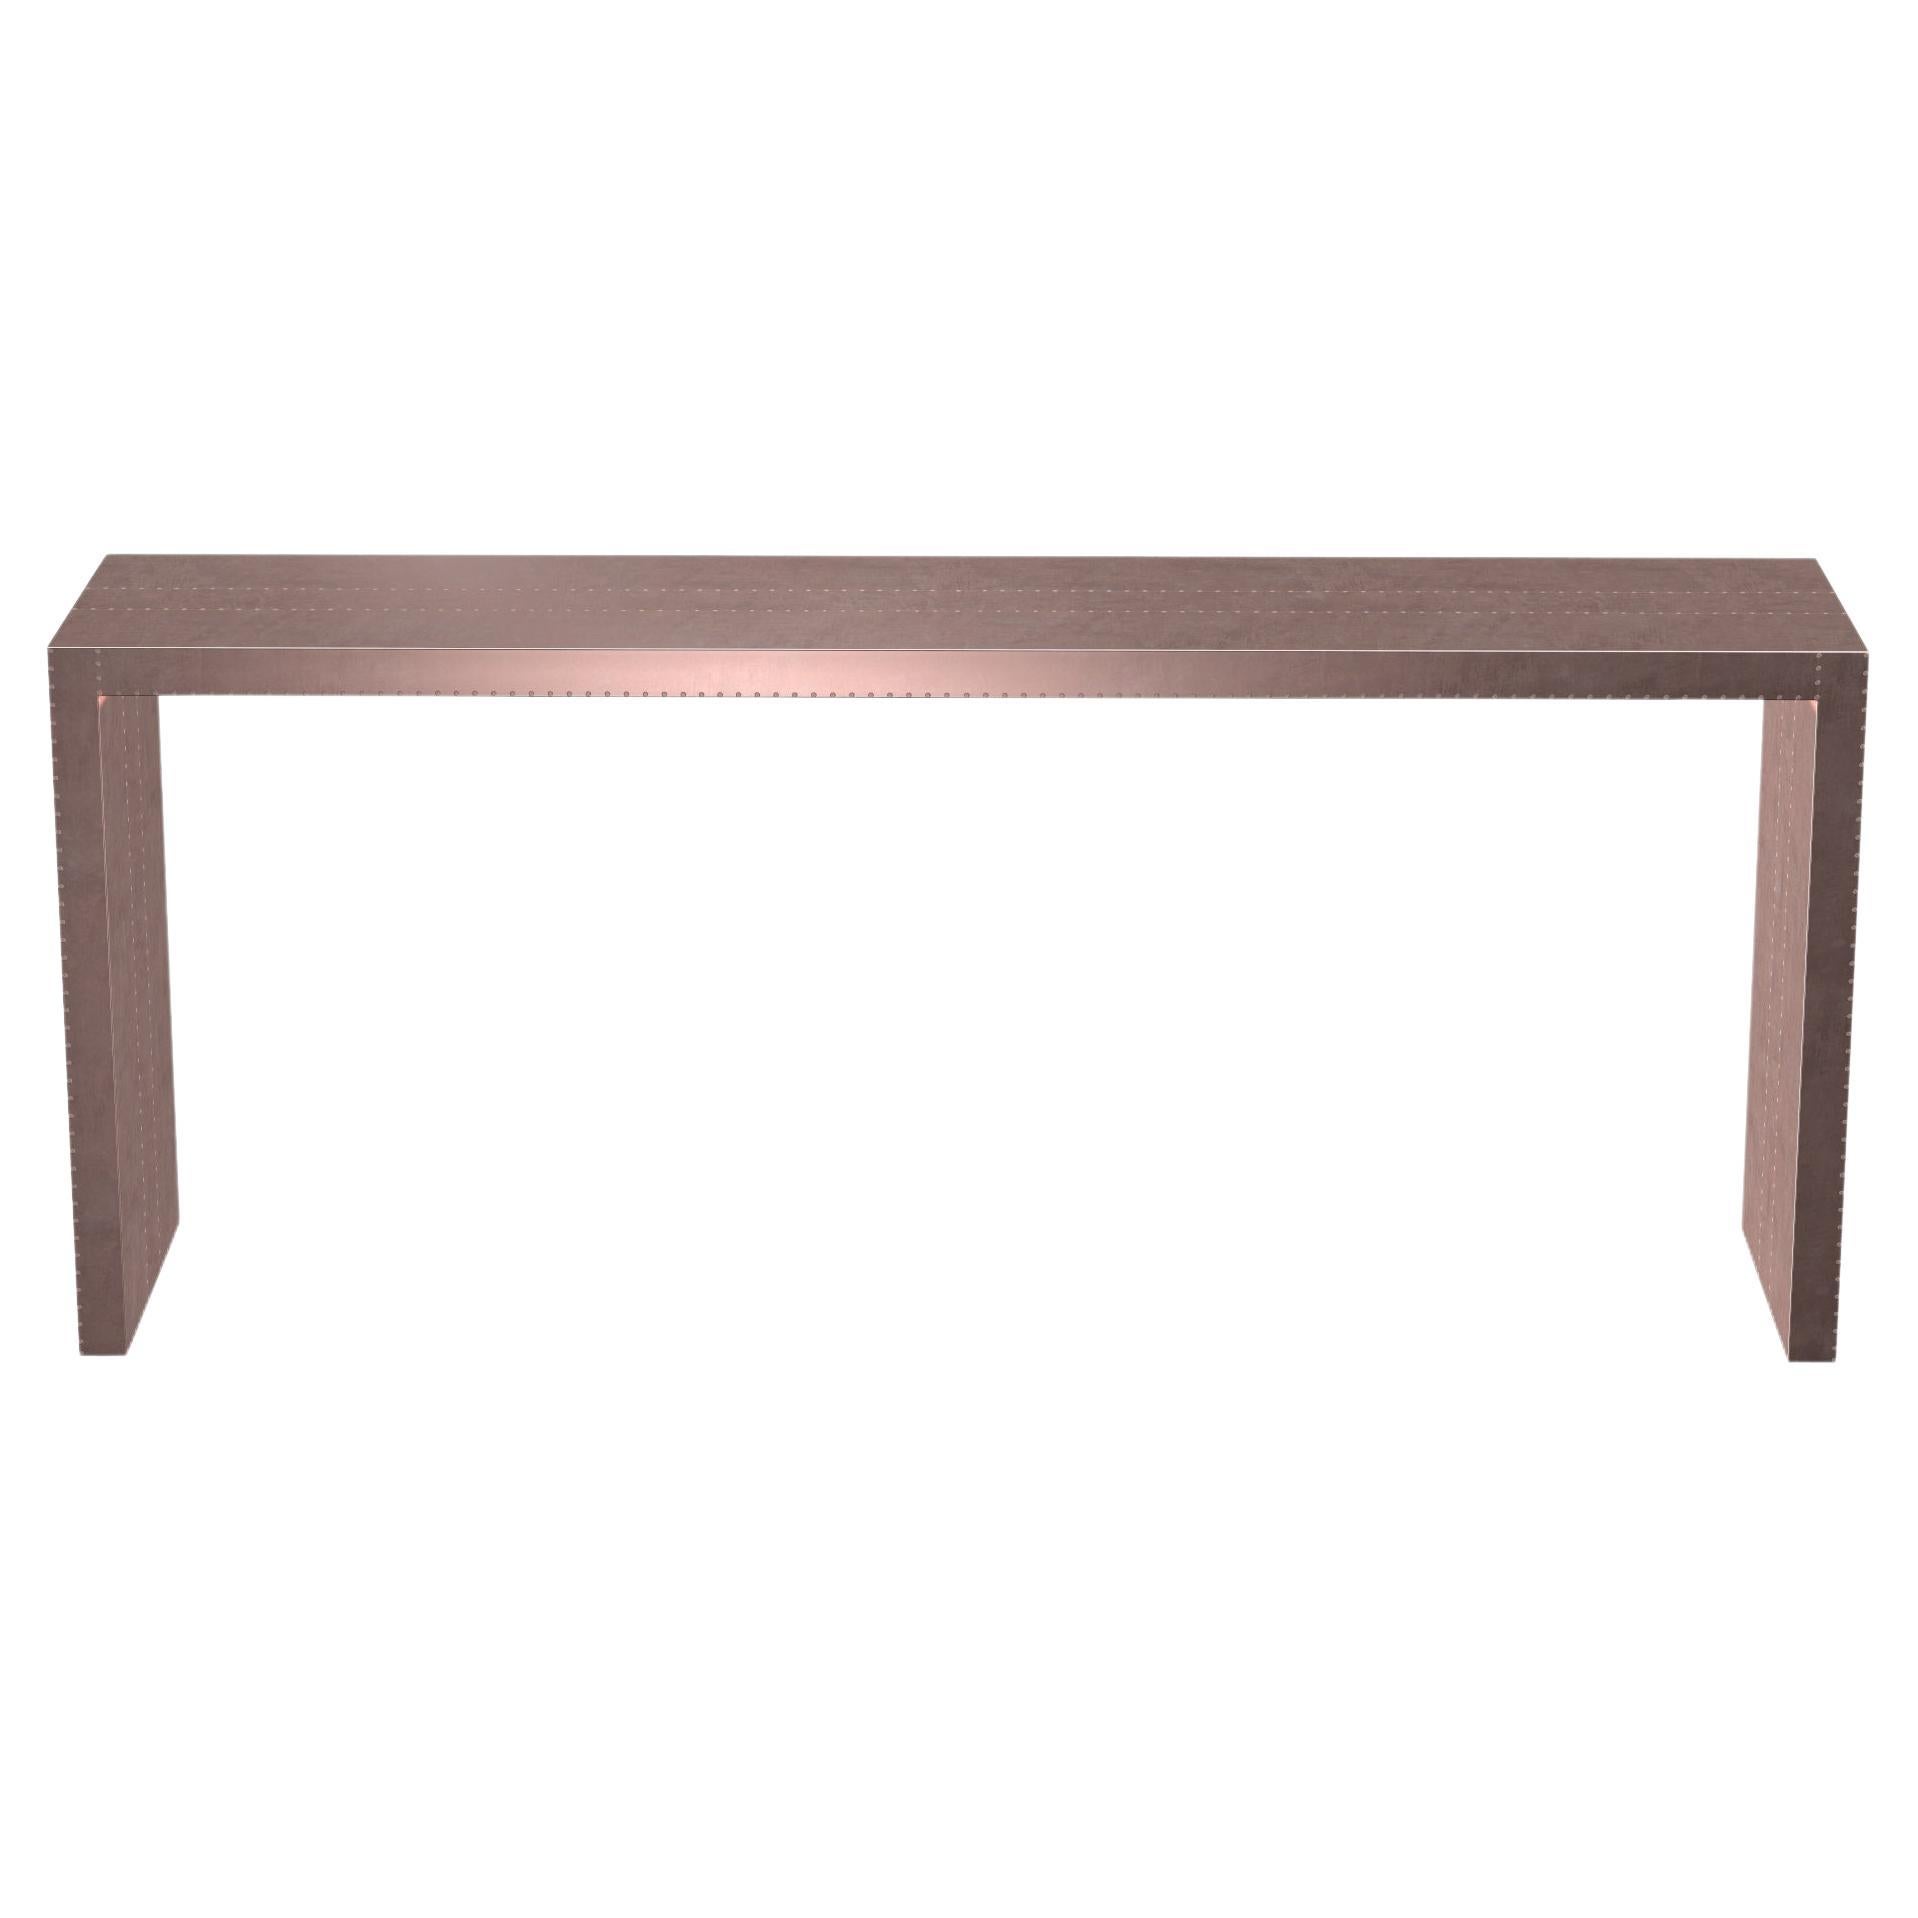 Art Deco Rectangular Console Tables Smooth Copper by Alison Spear for S. Odegard